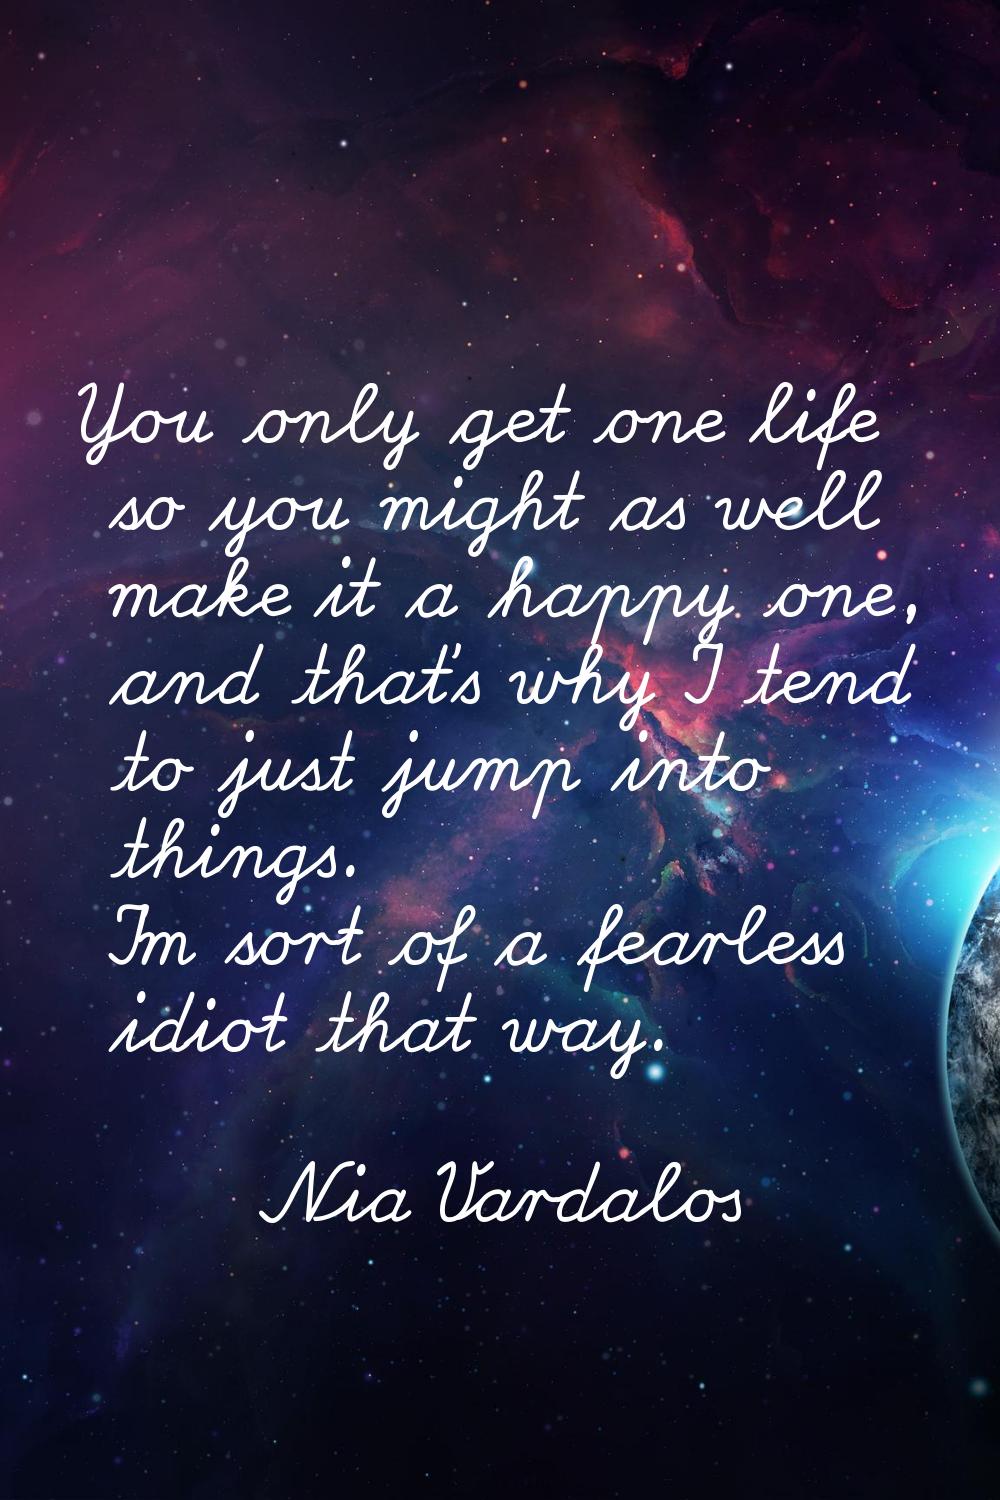 You only get one life so you might as well make it a happy one, and that's why I tend to just jump 